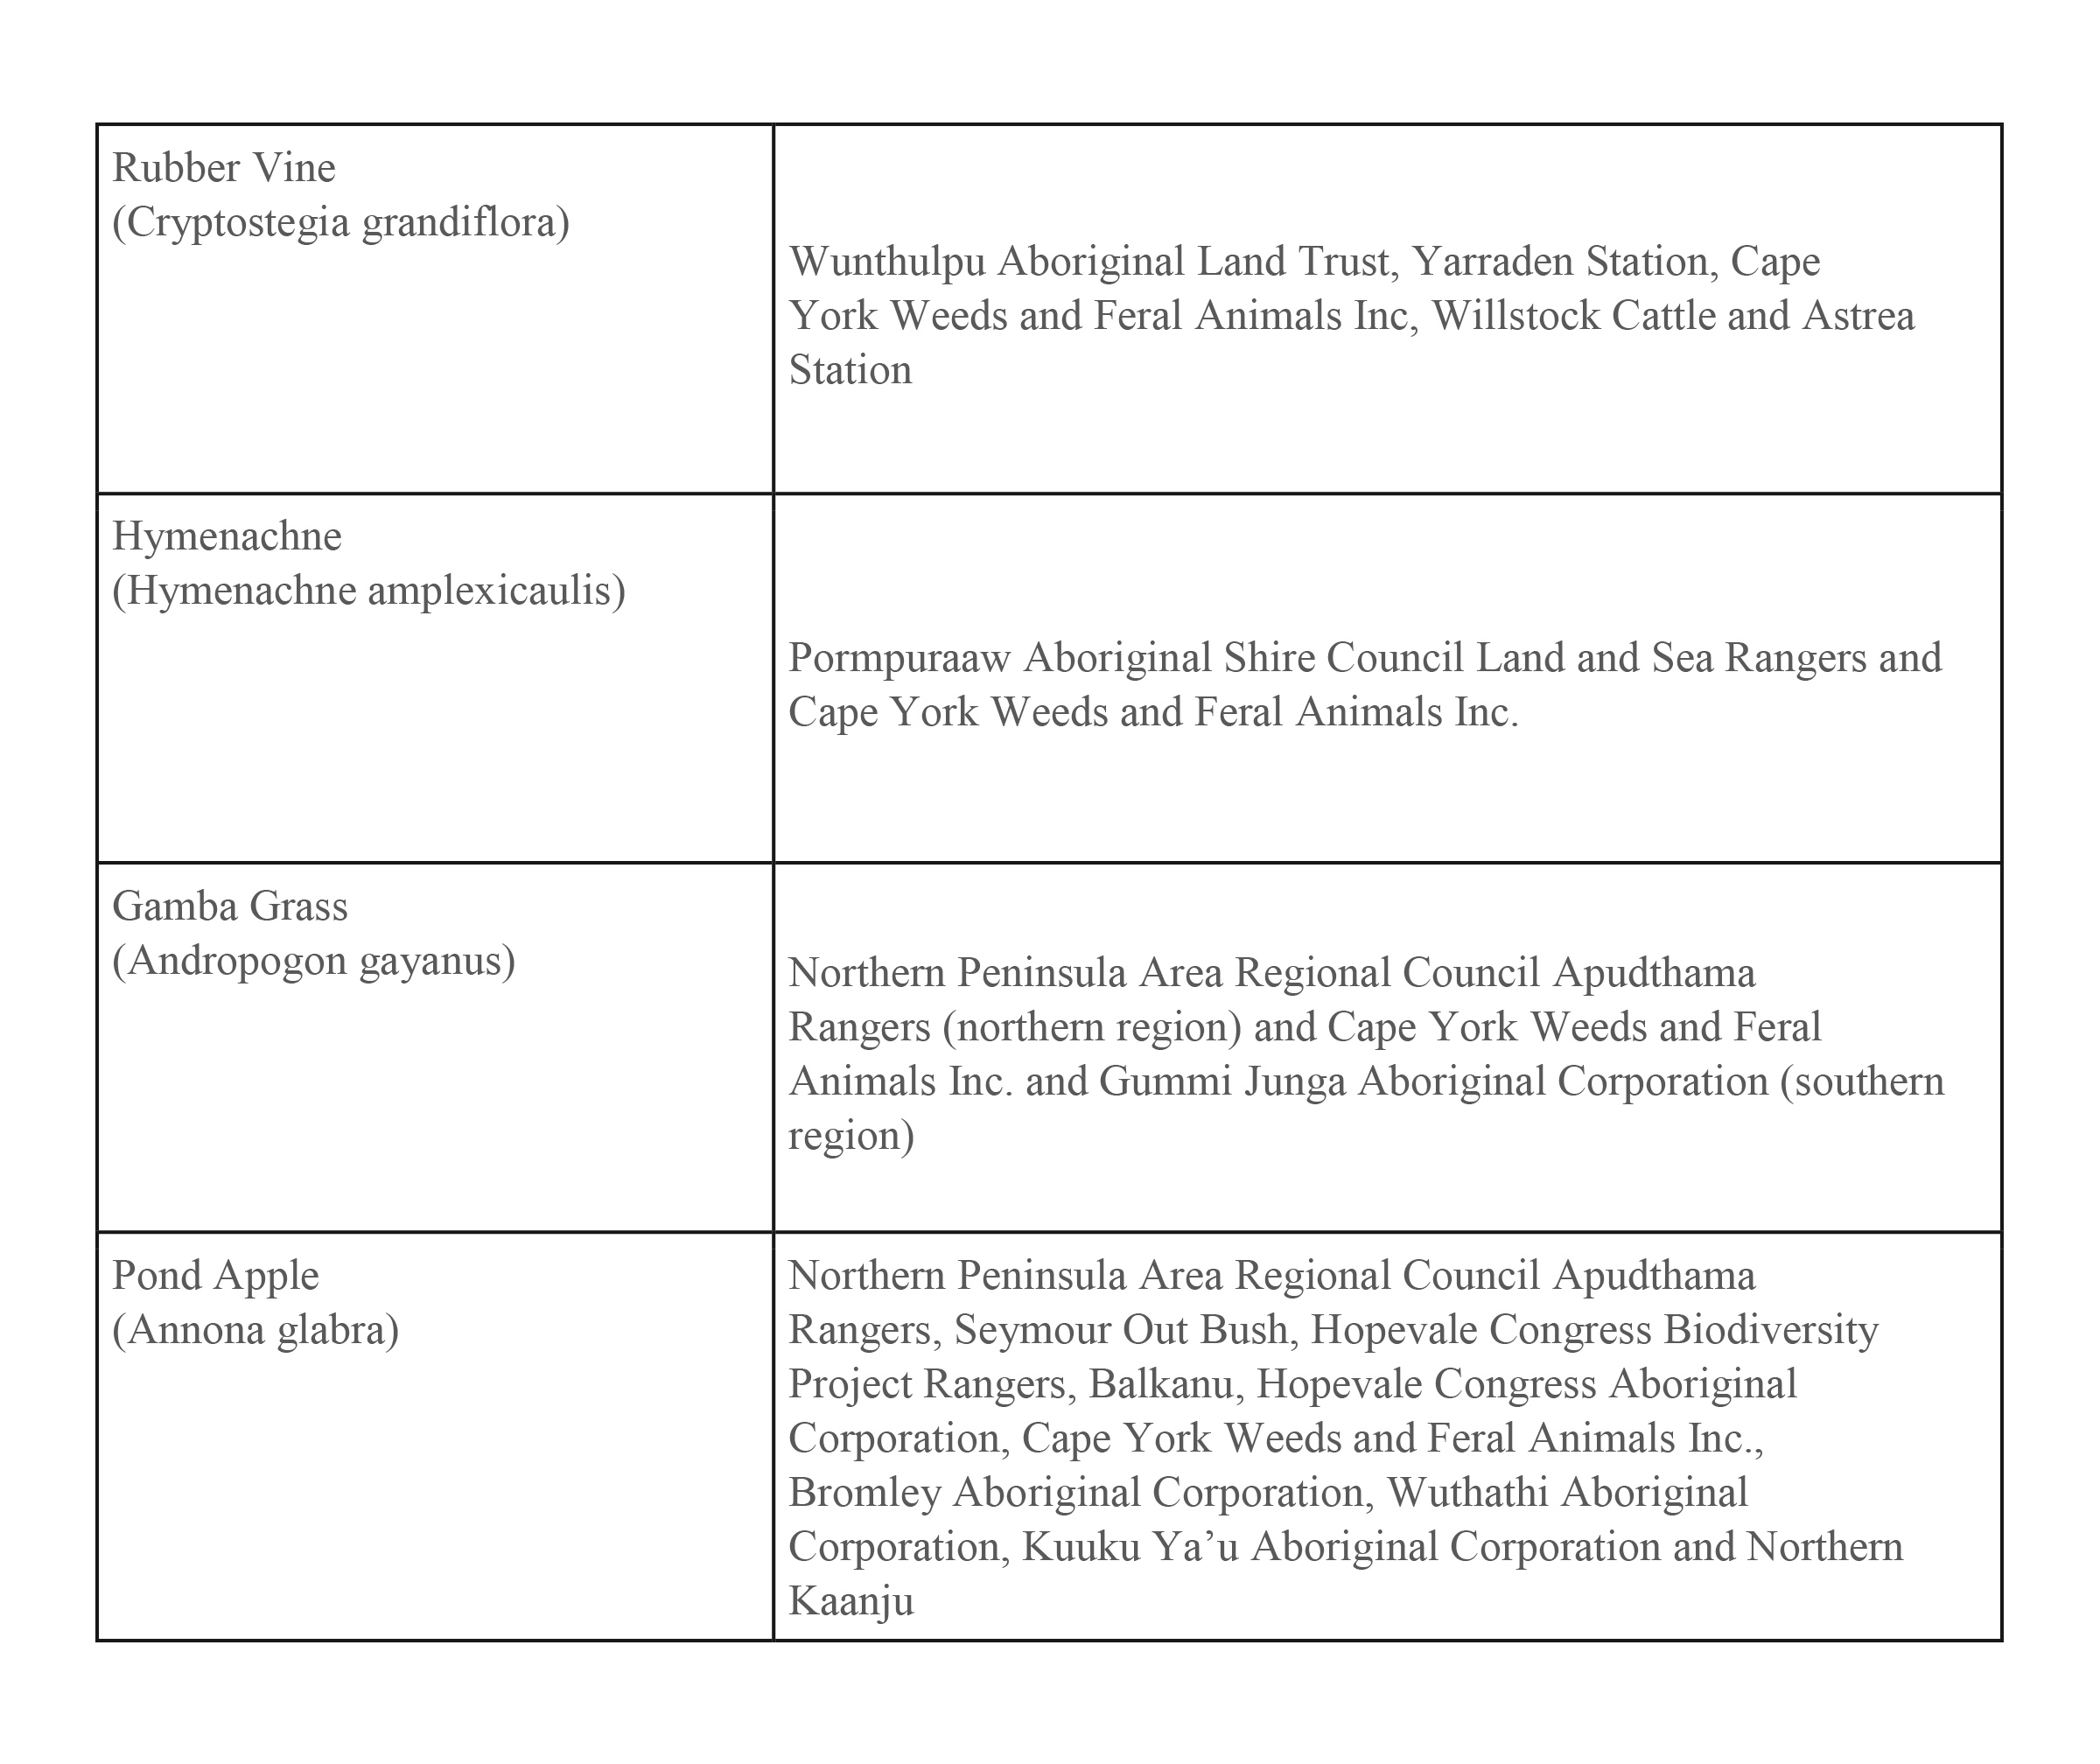 The below table illustrates the Cape York communities that have worked together to help control targeted species.